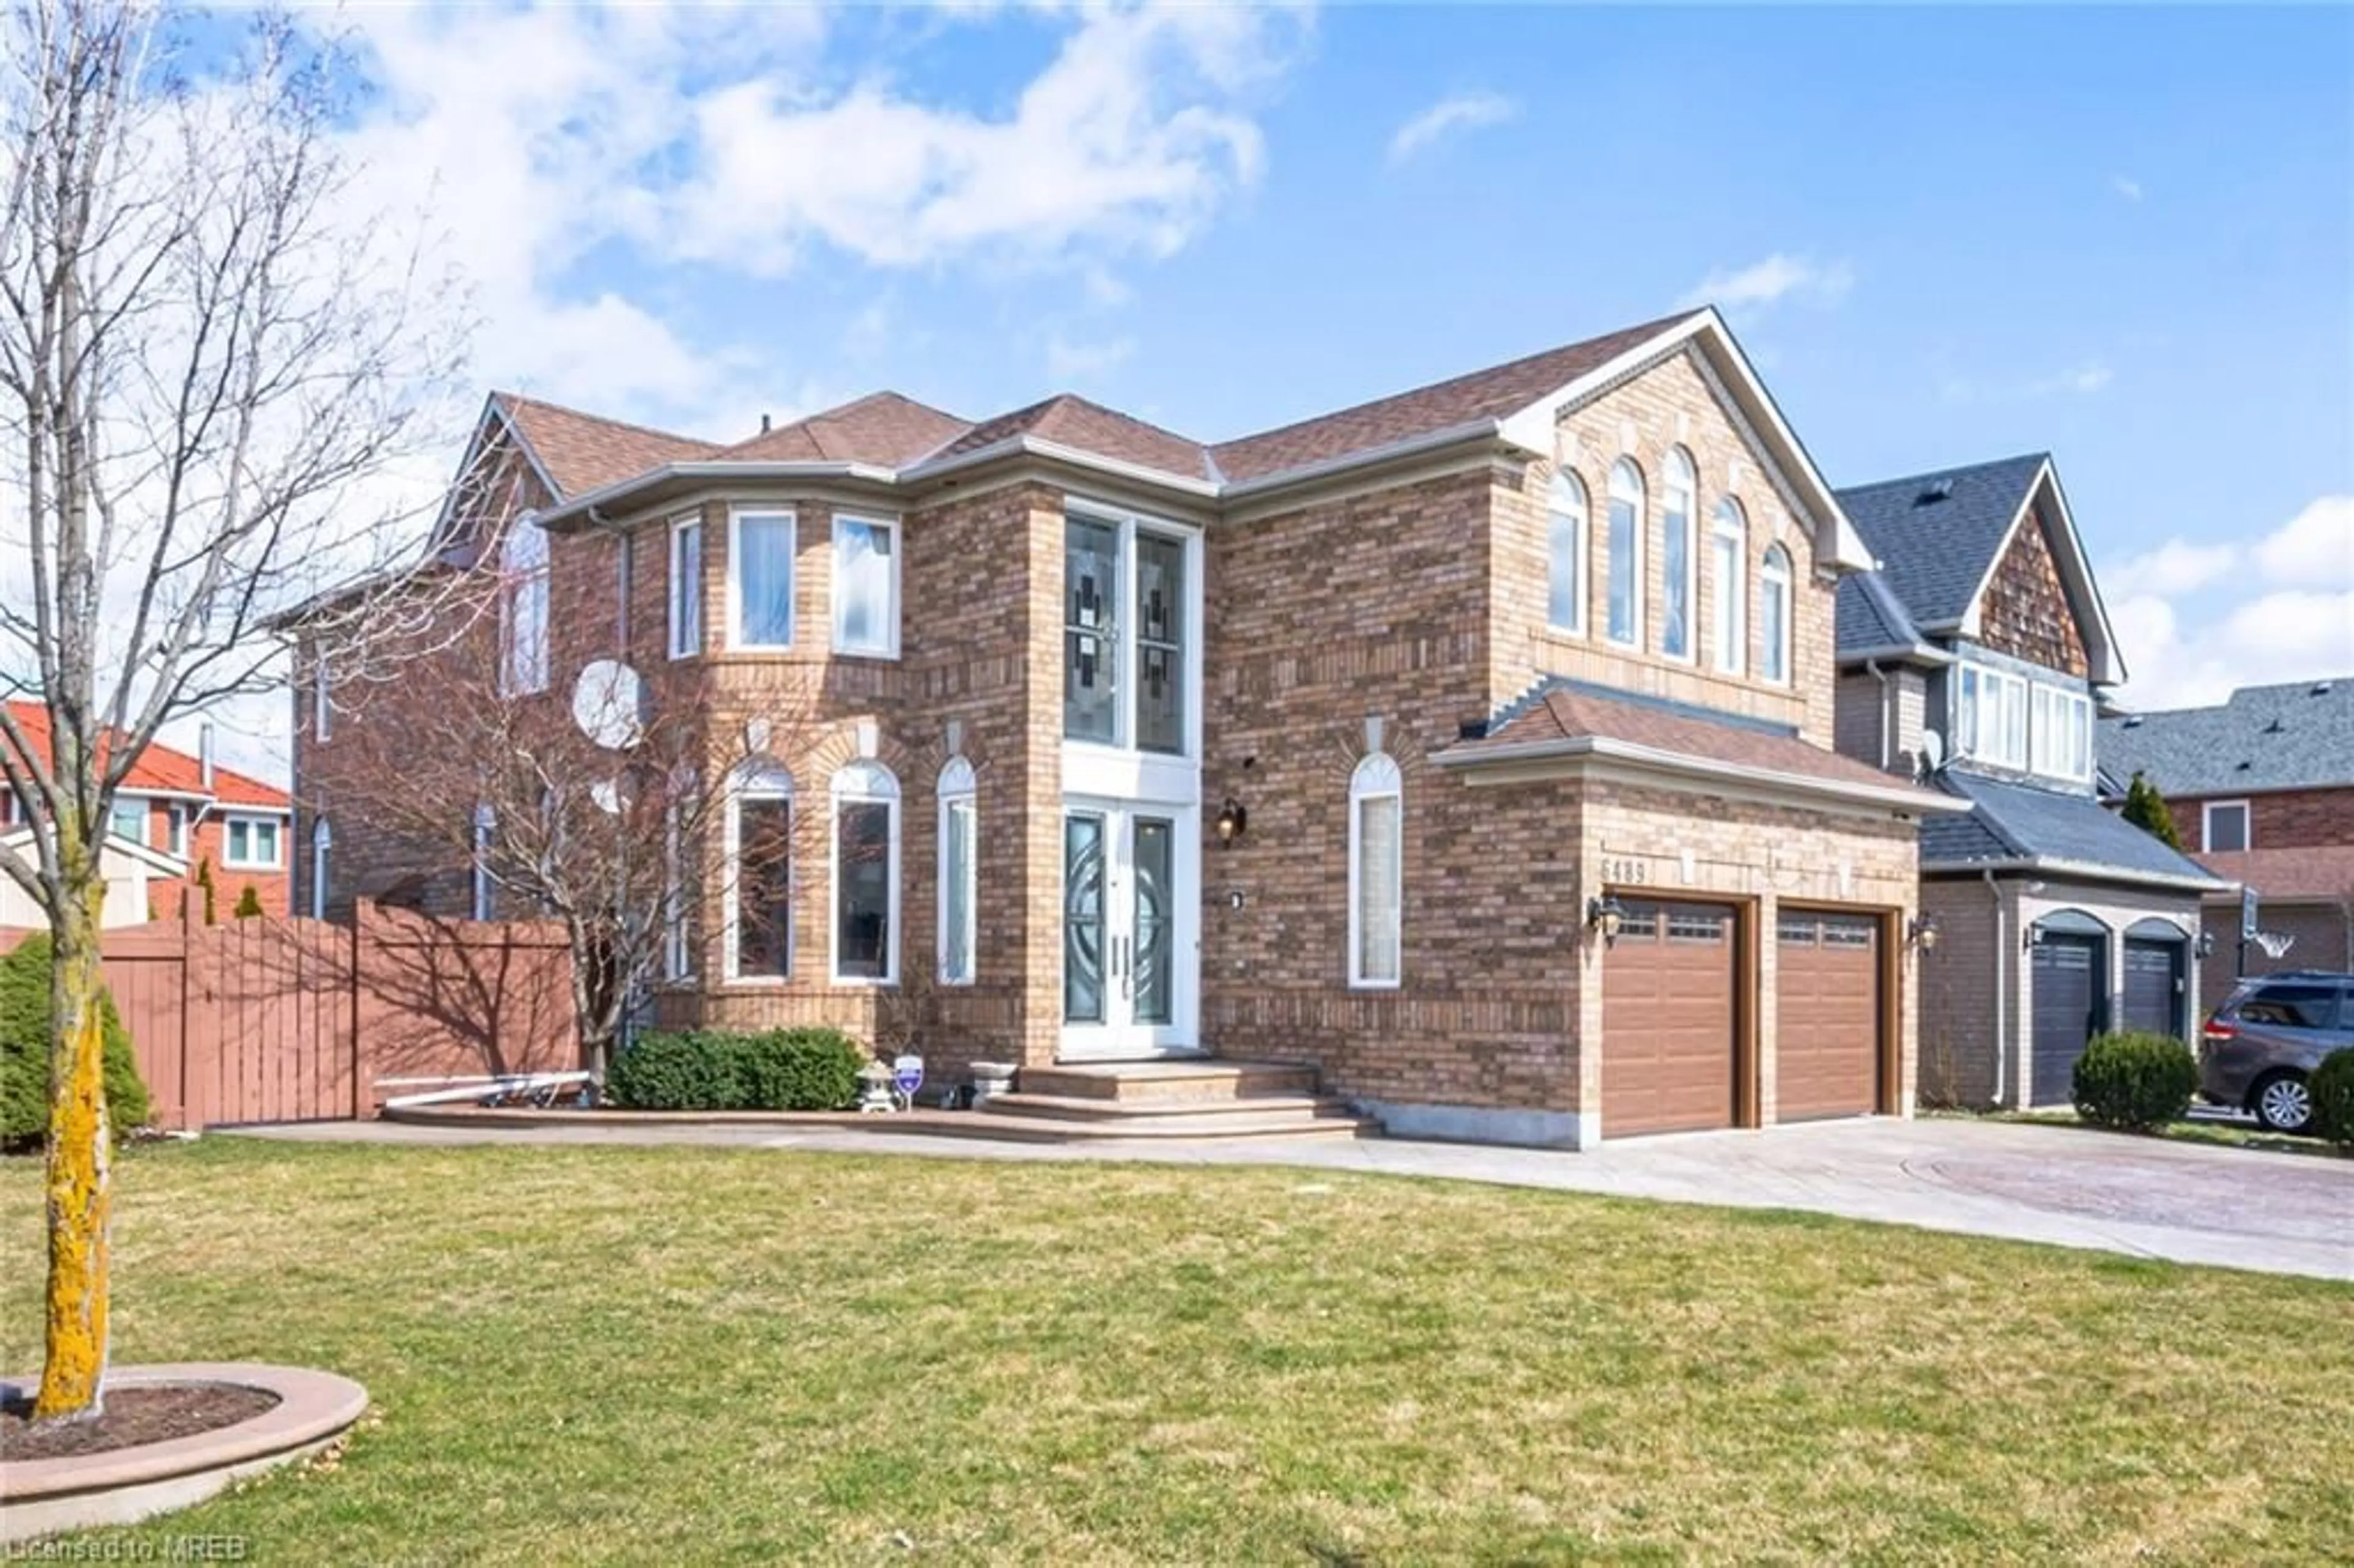 Home with brick exterior material for 6489 Hampden Woods Rd, Mississauga Ontario L5N 7W1